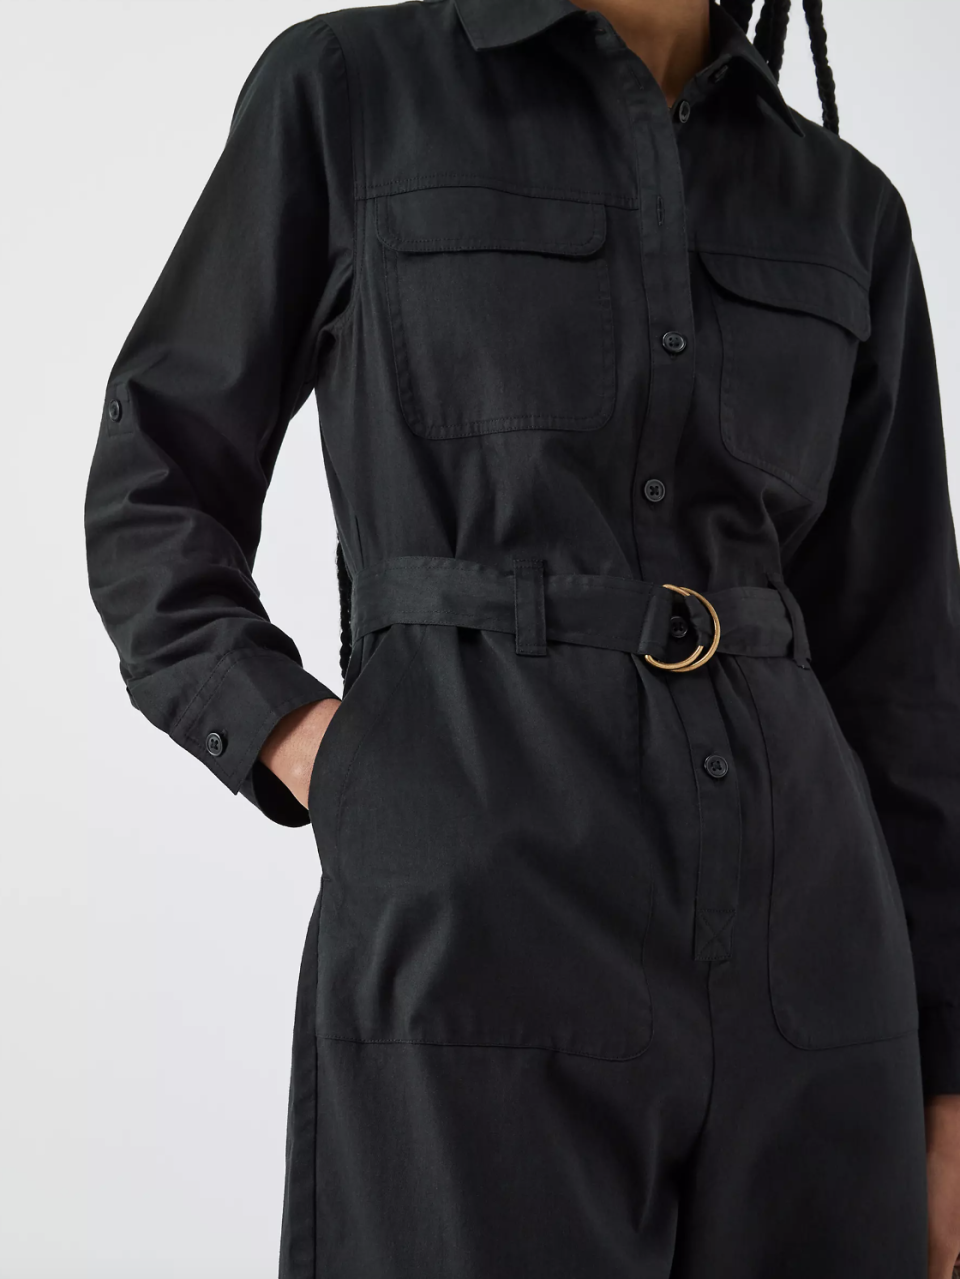 We love the tie waist, collared neckline, oversized pockets and button-down style. (John Lewis)